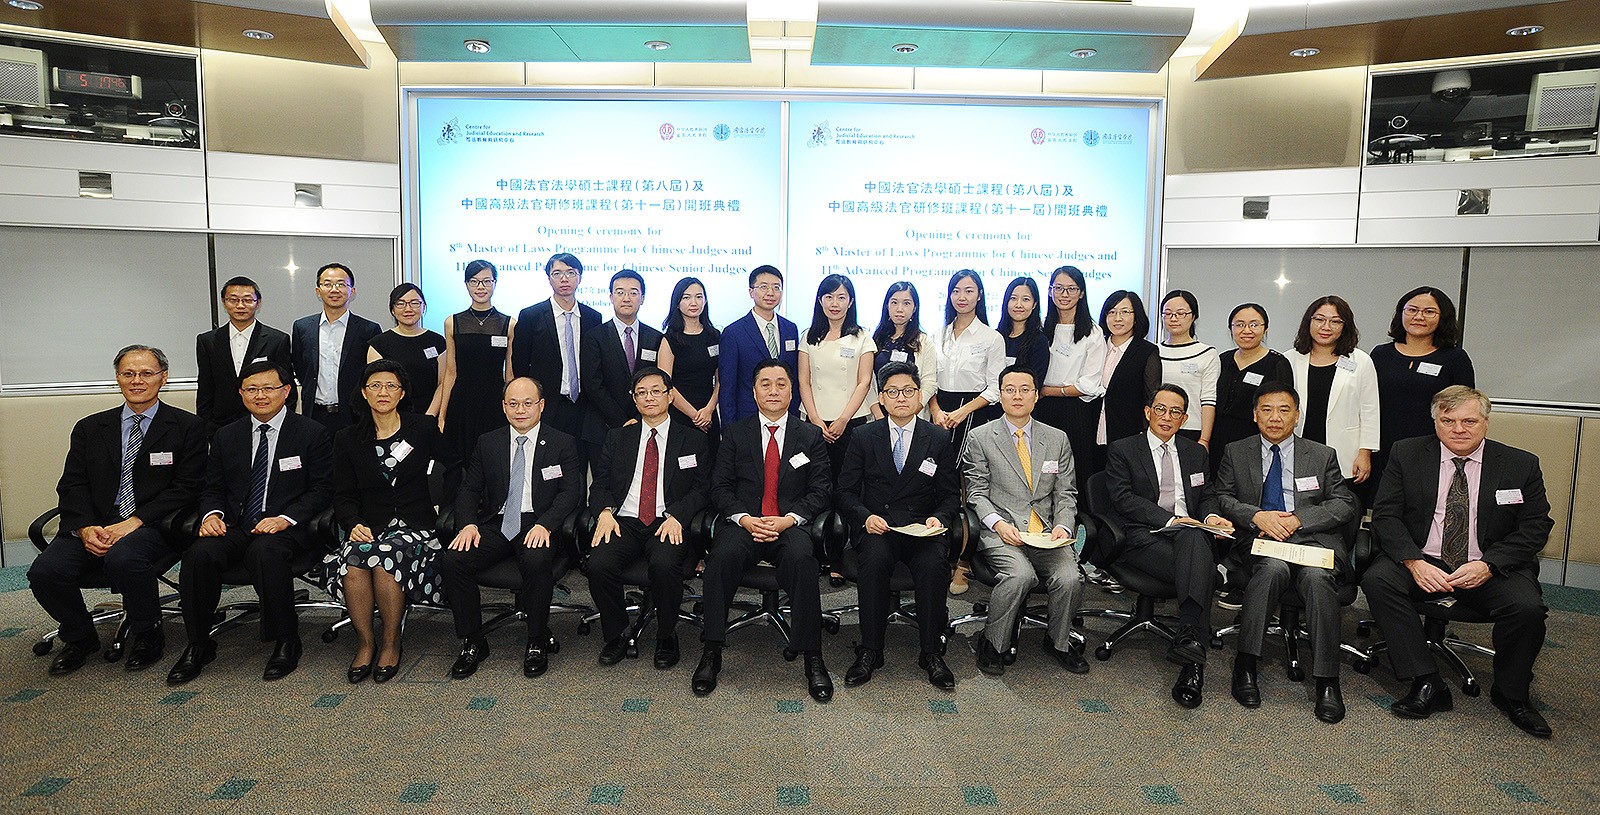 An opening ceremony was held for the Chinese judges programmes 